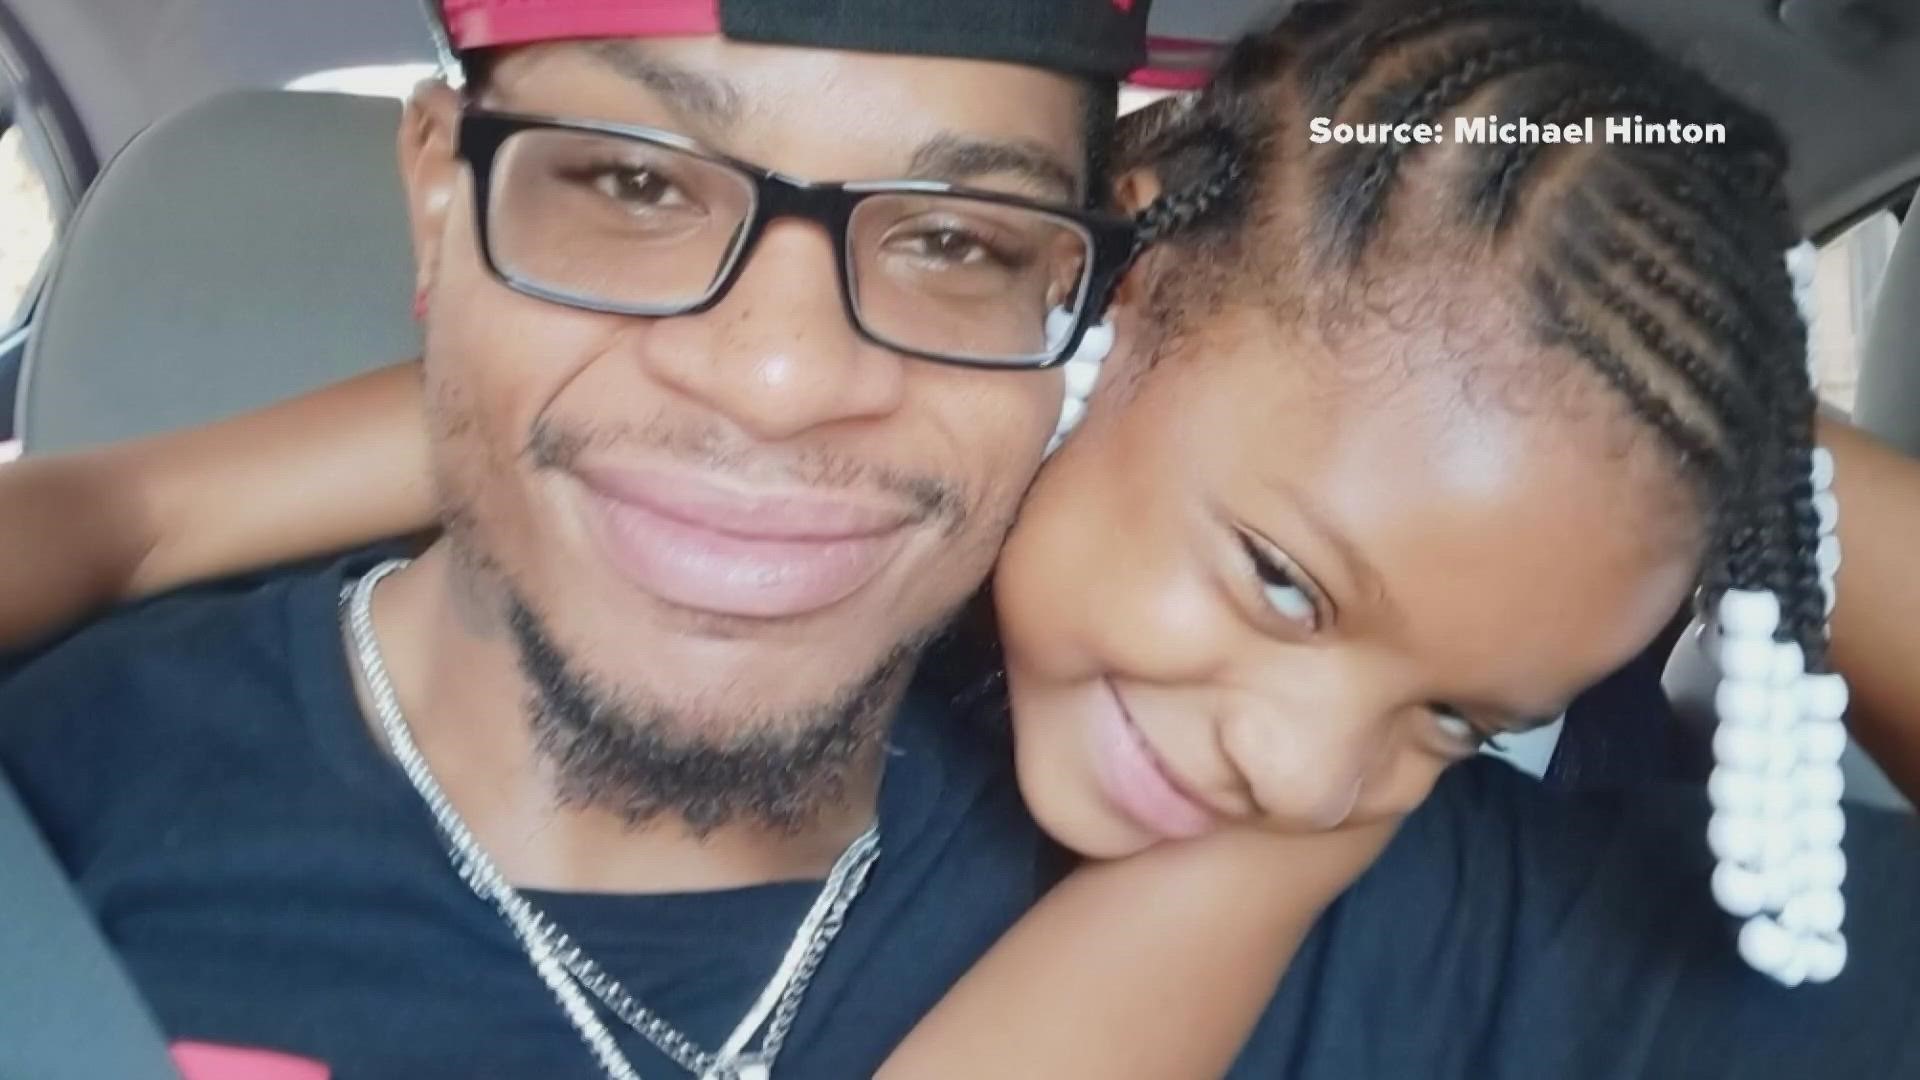 : 8-year-old Aacuria Hinton was shot while sleeping in her bed. Her father, Michael Hinton says the bullet caused extensive injuries to her mouth.